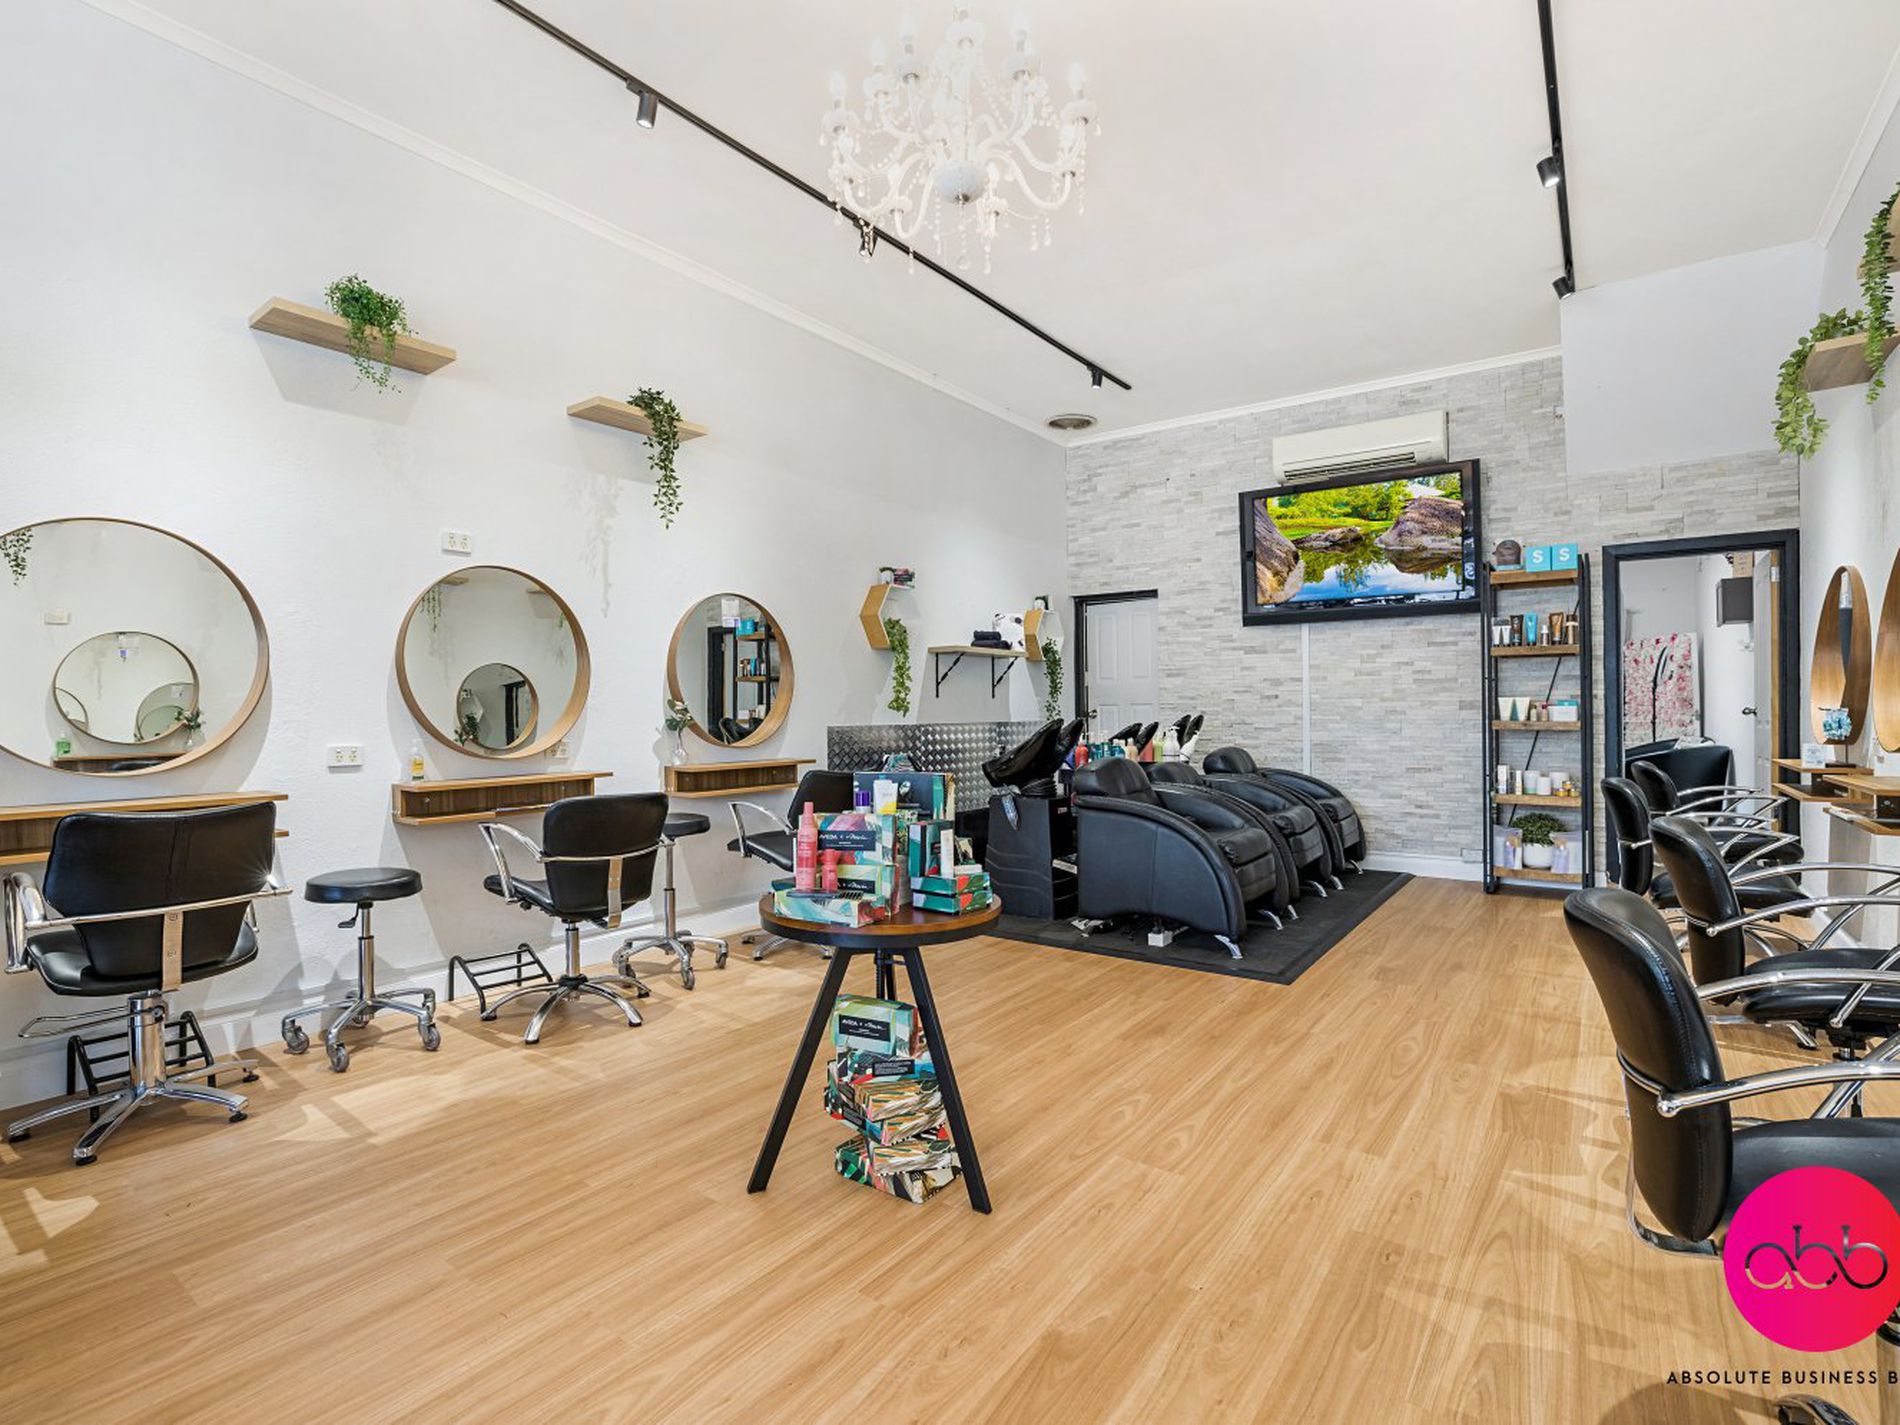 Superb 5 Day Hair with Beauty Salon Business for Sale City Fringe
